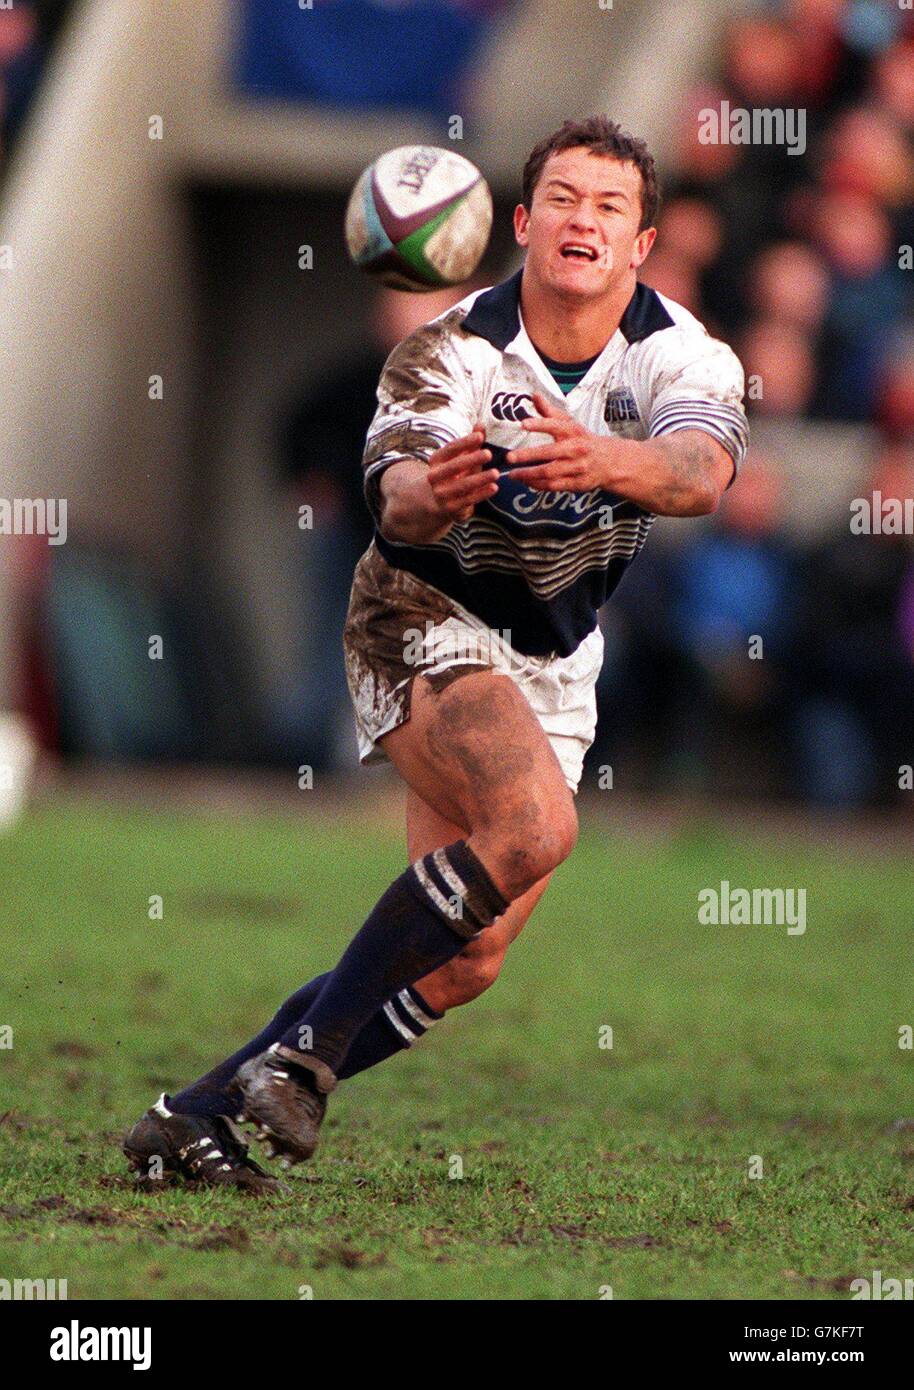 Rugby Union. Harlequins / Auckland Blues. Carlos Spencer, Auckland Blues  Foto stock - Alamy